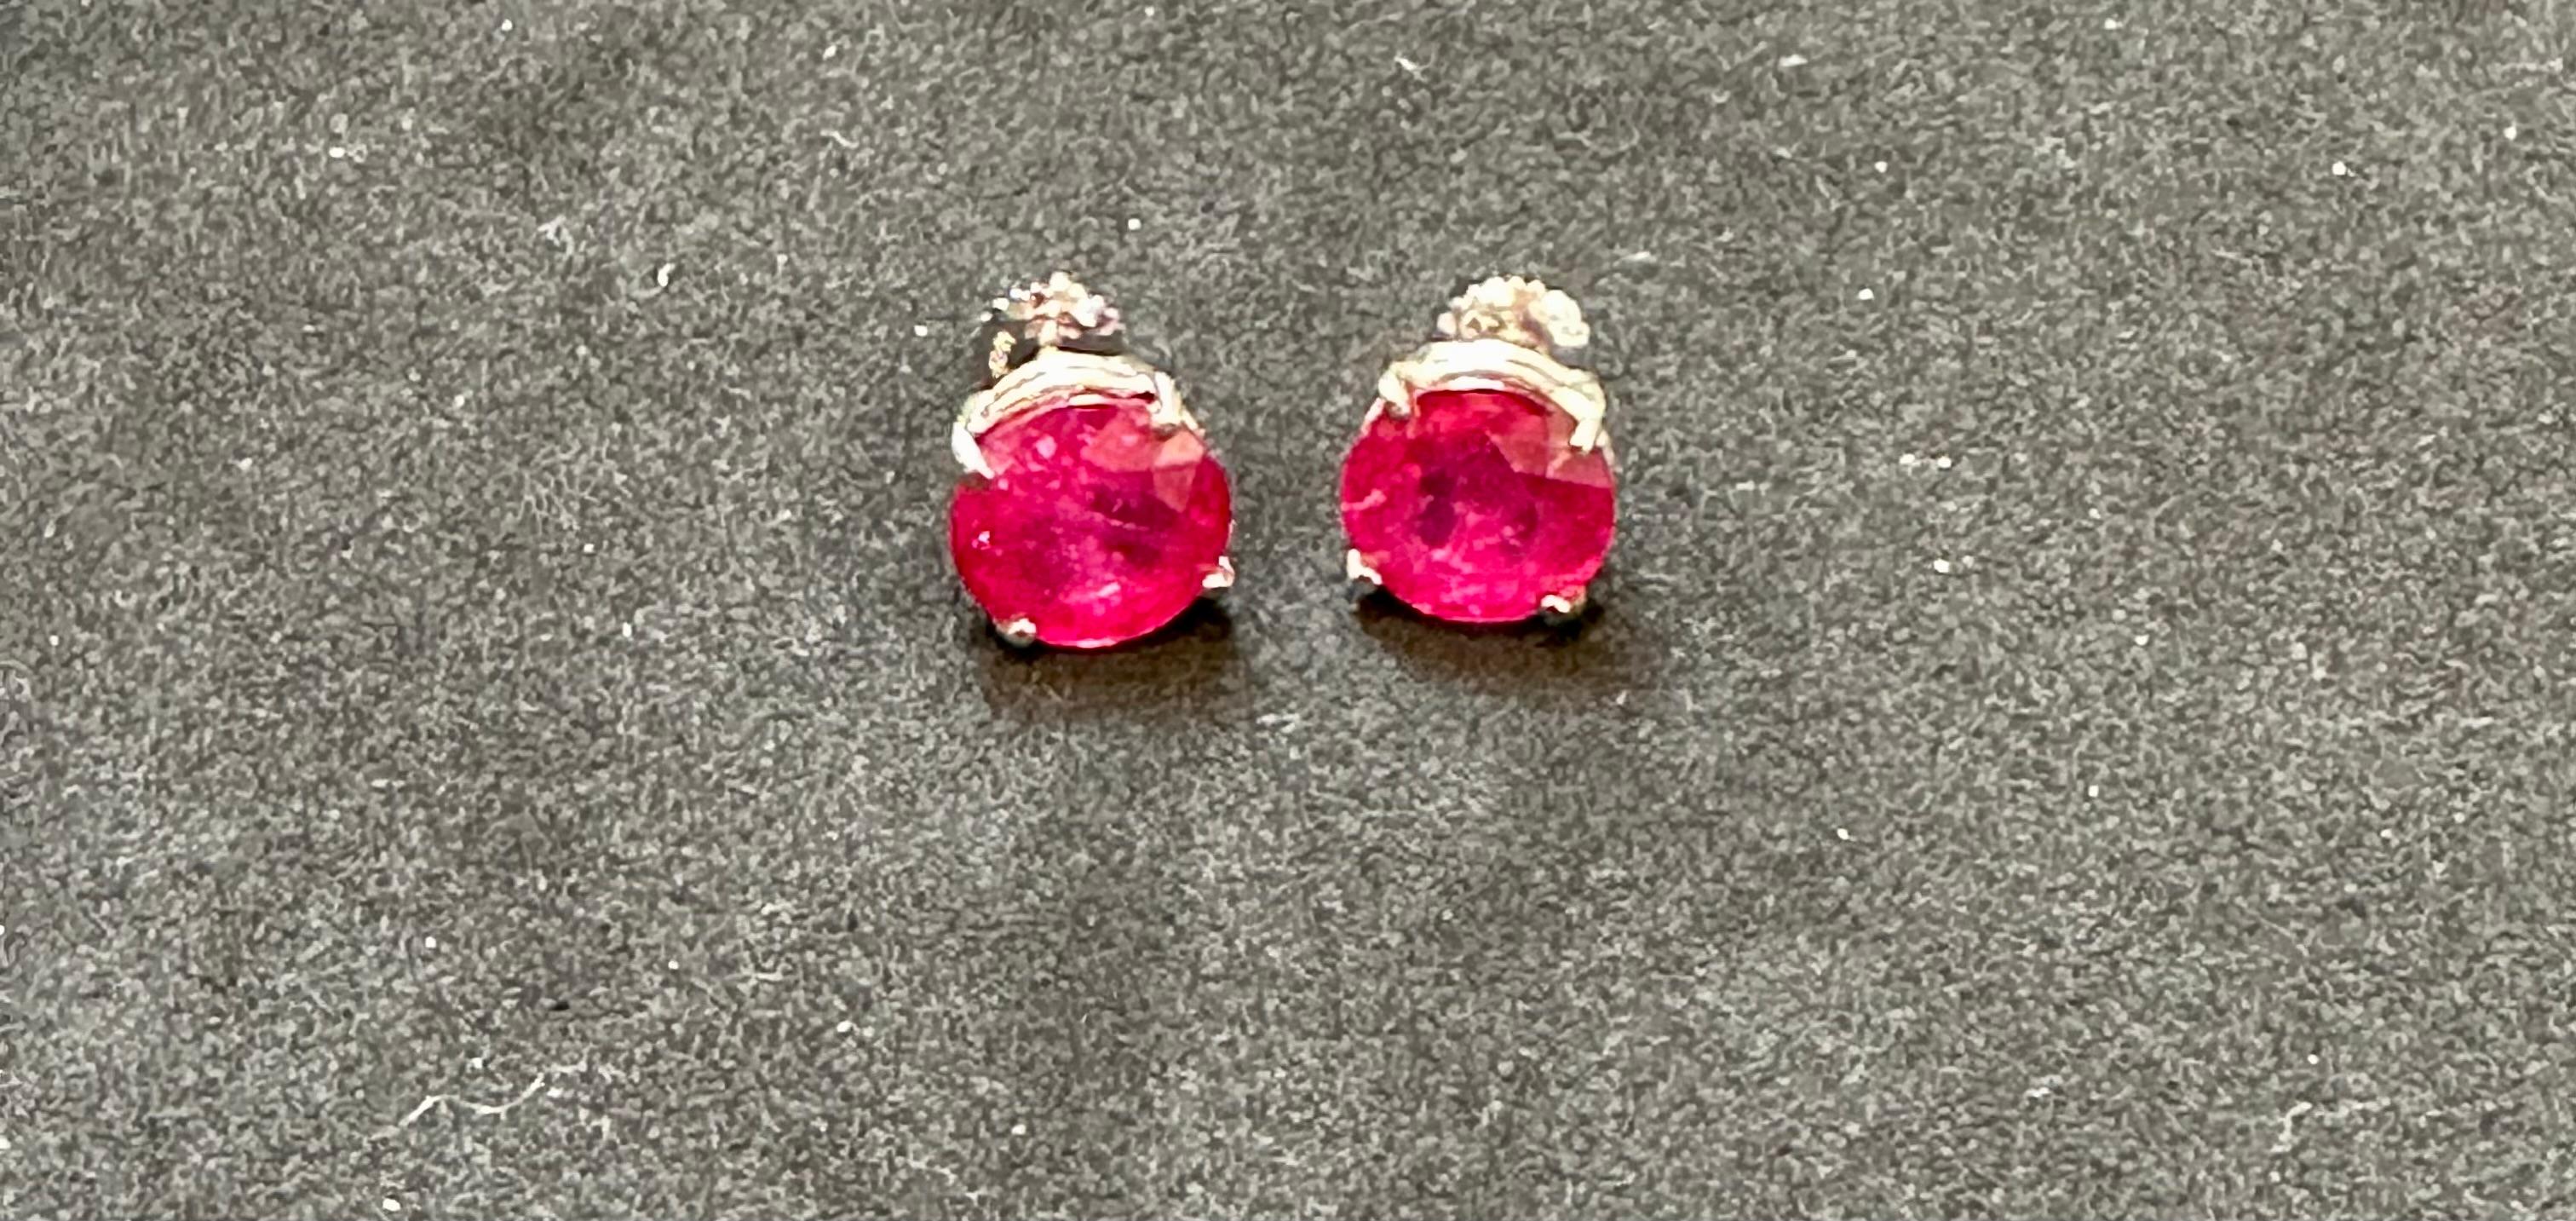 6 Carat Solitaire Treated Ruby Earrings 4 Prongs Screw Back 14 Karat White Gold 5